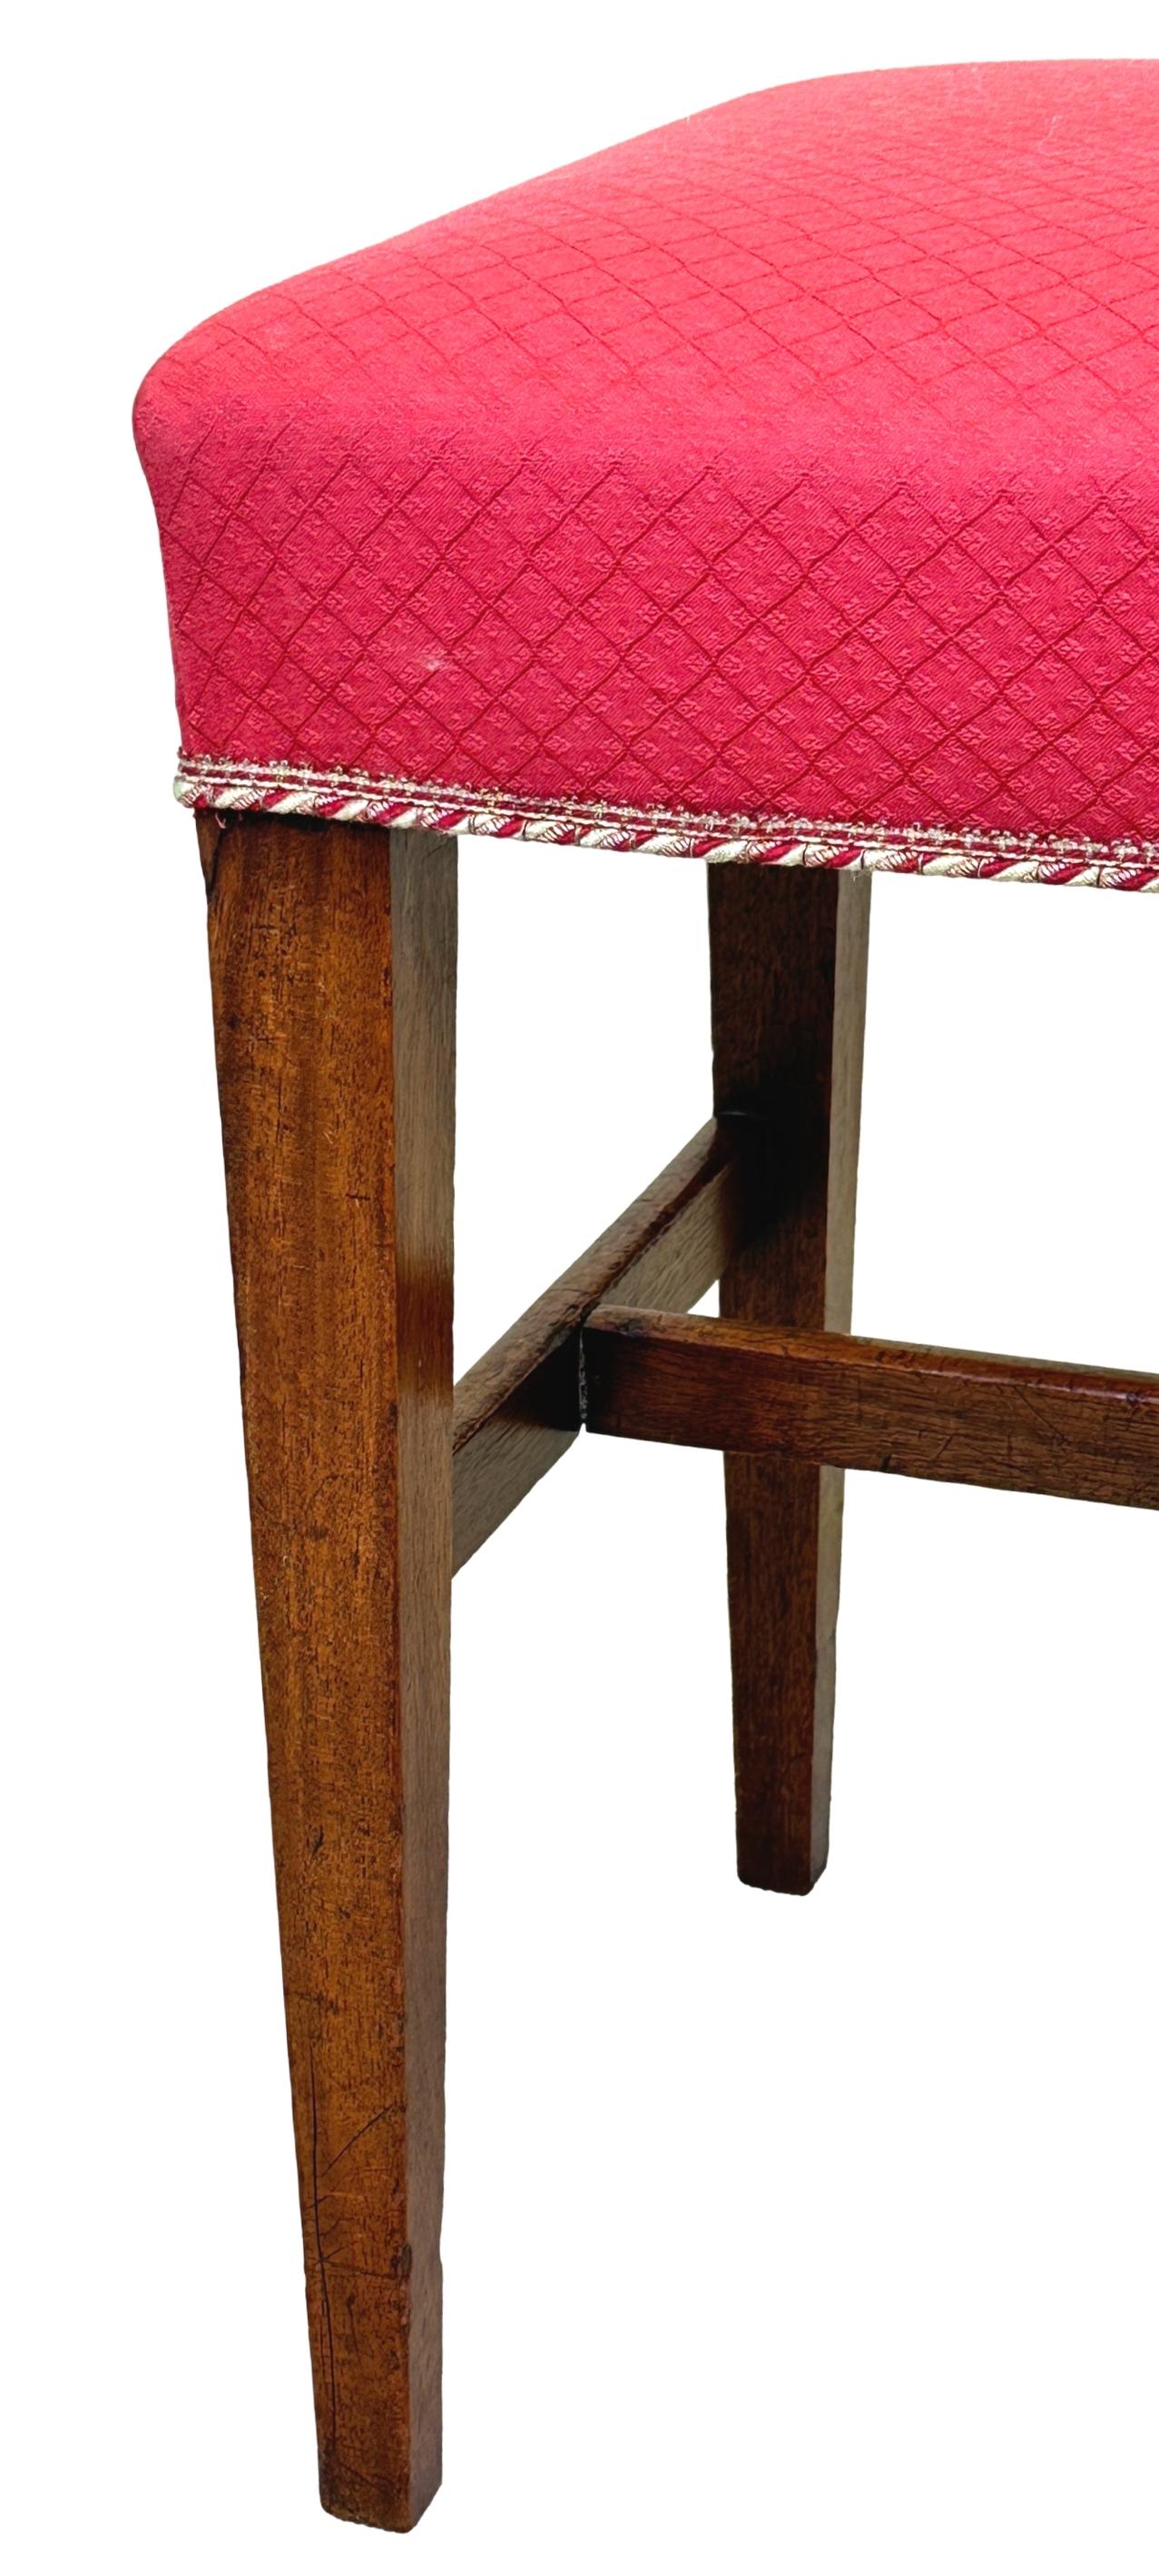 A Good Quality Late 18th Century, English, Georgian Mahogany Stool Of Rectangular Form, Having Upholstered Seat Raised On Elegant Square Tapered Legs And Stretchers.

This simple georgian mahogany stool is a great example of utilitarian, 18th